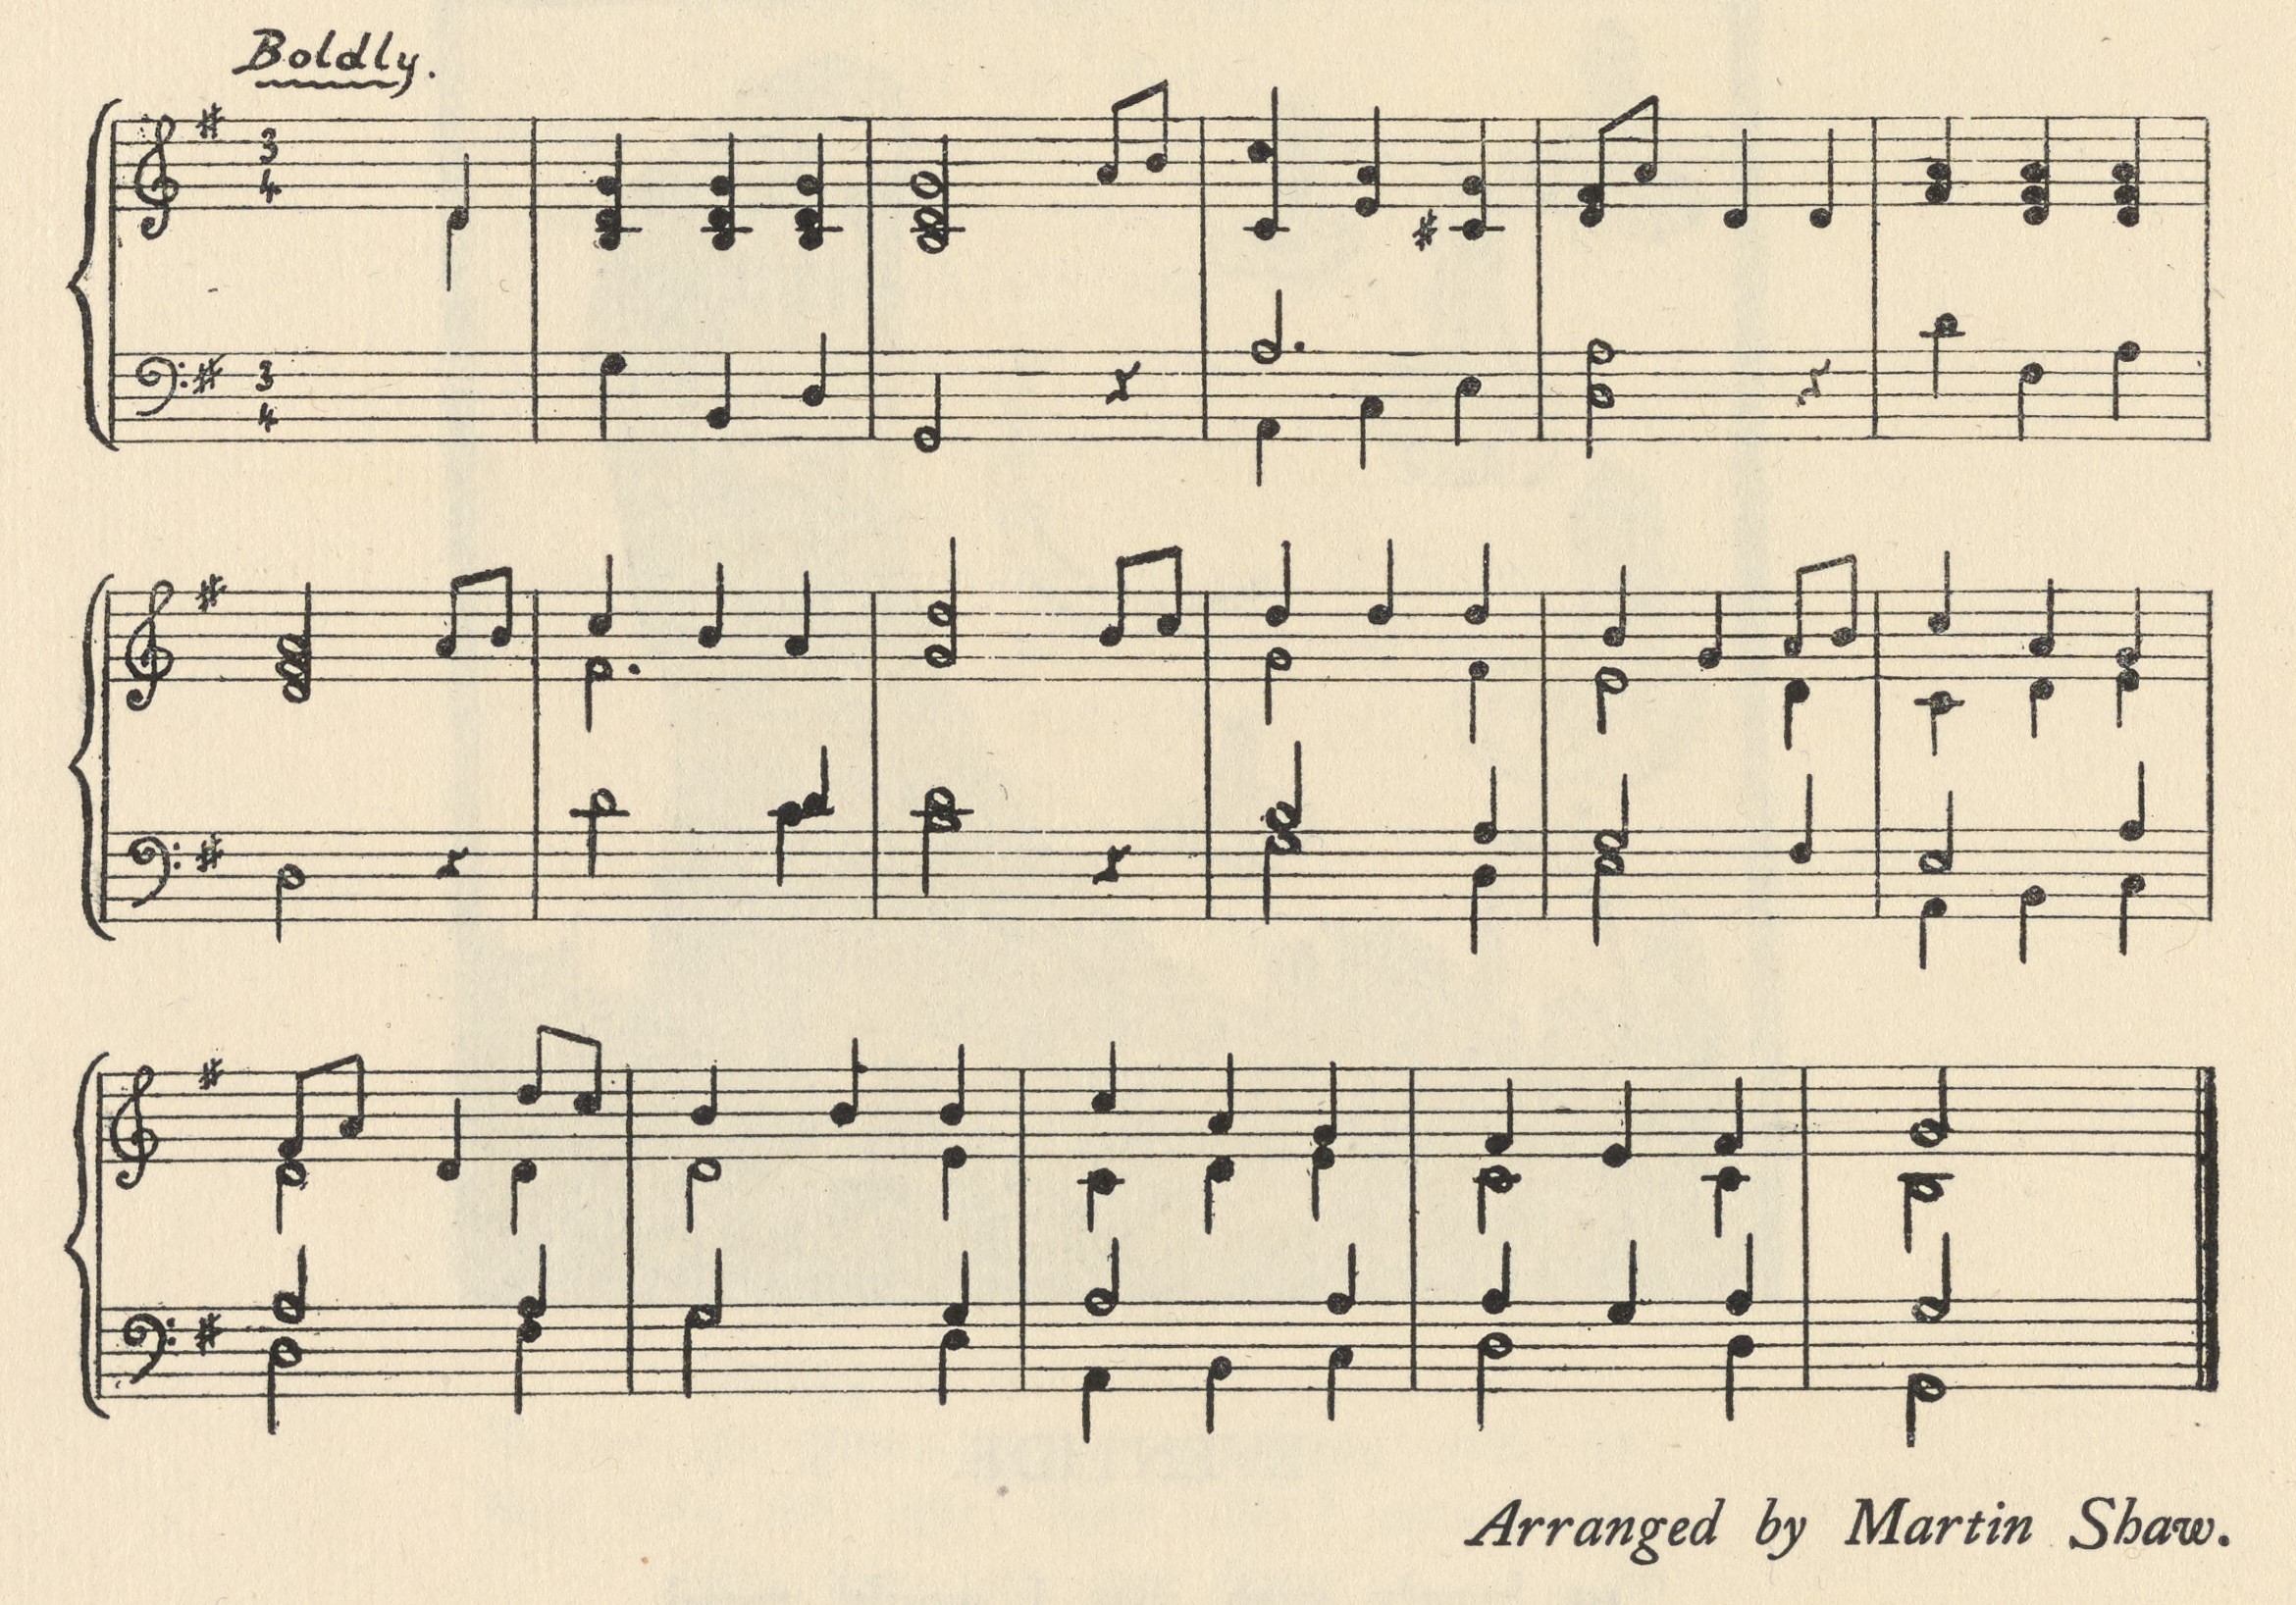 The sheet music consists of three staves of musical notation for the song “Spanish Ladies.” Above the music, the title is printed, centered on the page. Below the music, “Arranged by Martin Shaw.” is printed in italics. The music is in ¾ time, with an F sharp key signature, and is to be played “Boldly.”